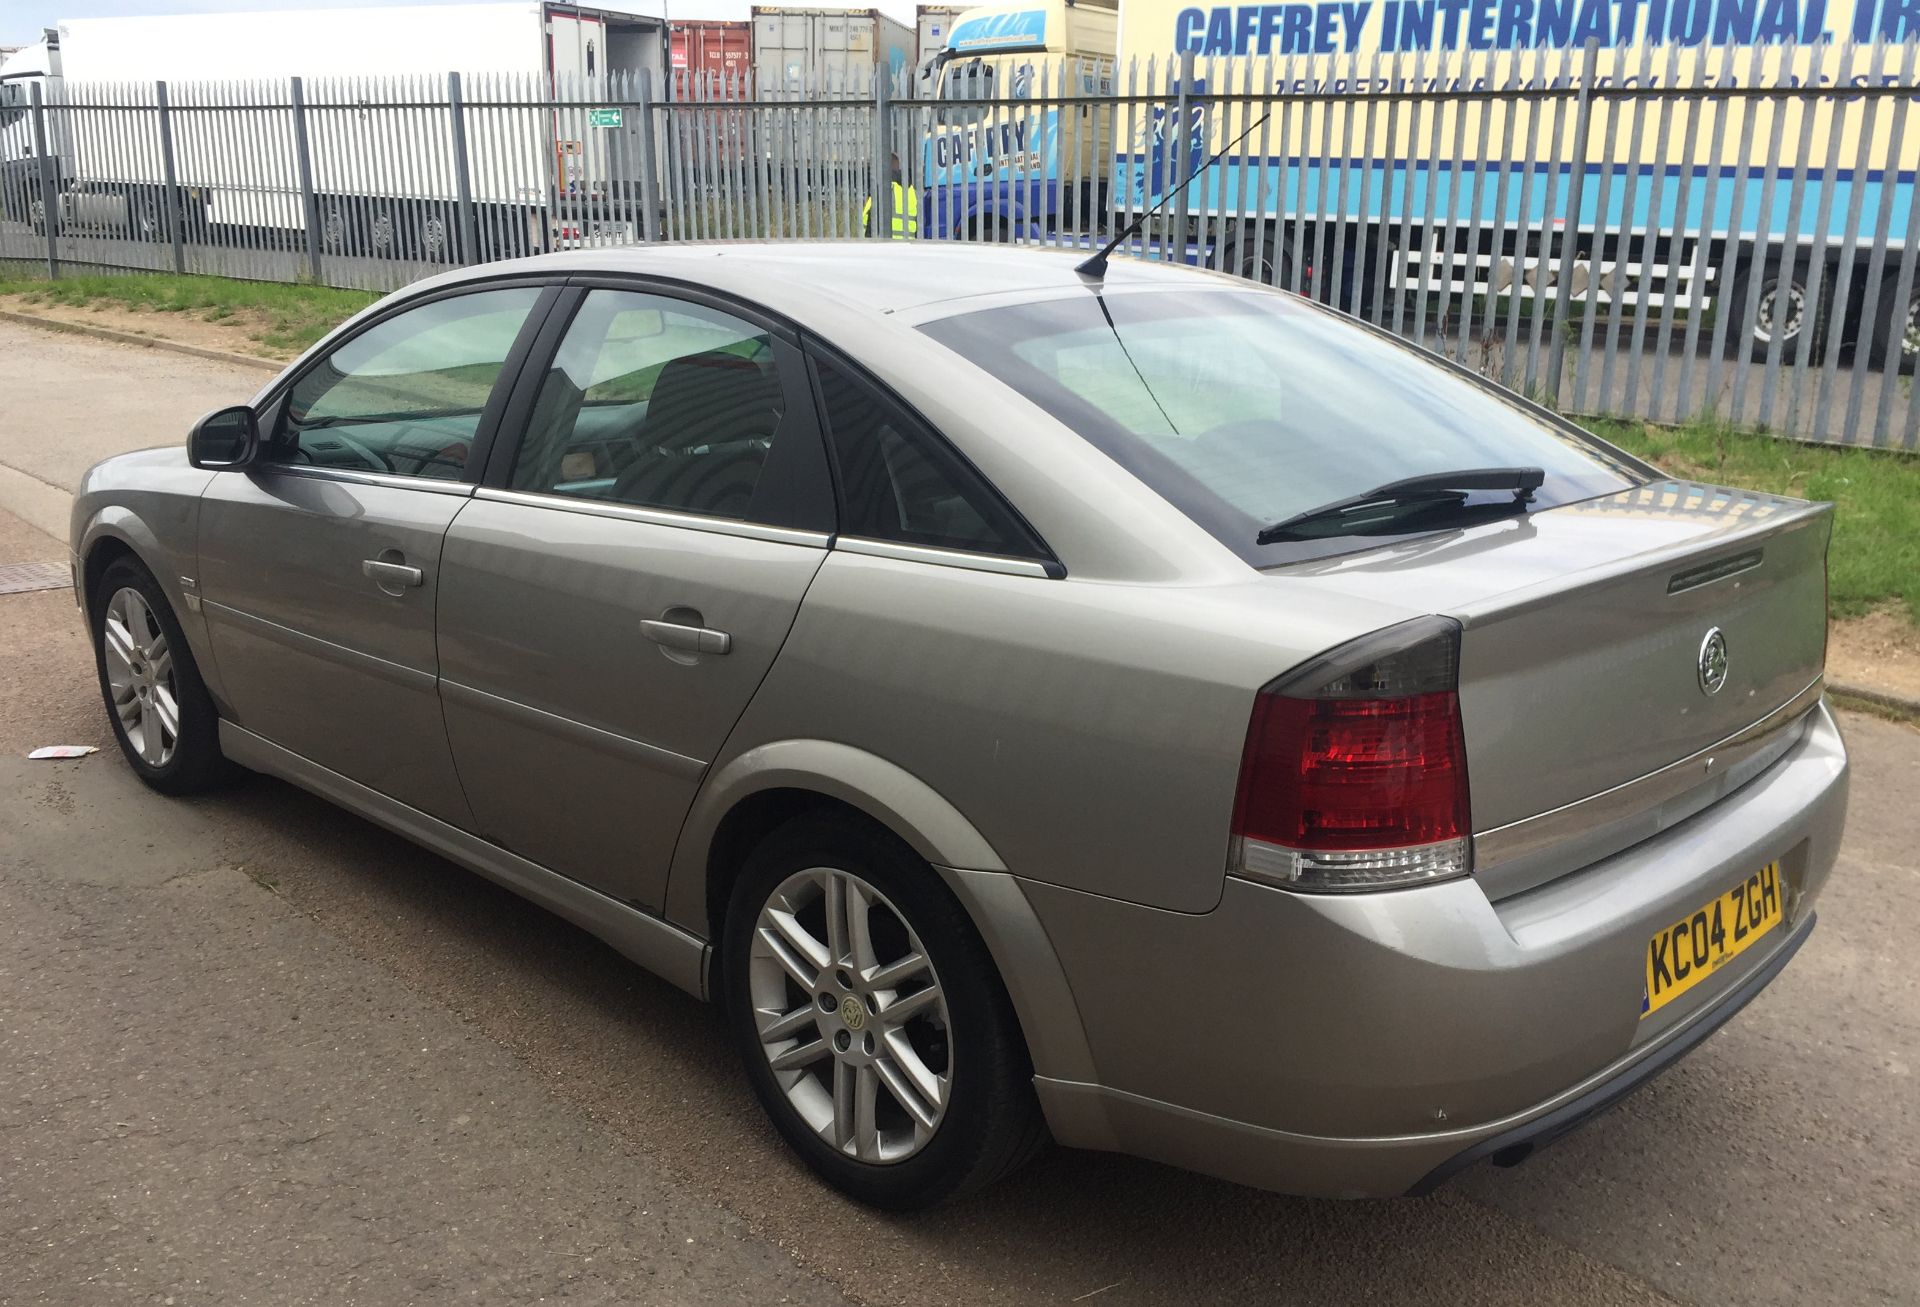 2004 Vauxhall Vectra 2.2 Sri Automatic 4 Dr Saloon - CL505 - NO VAT ON THE HAMMER - Location: Corby, - Image 6 of 7